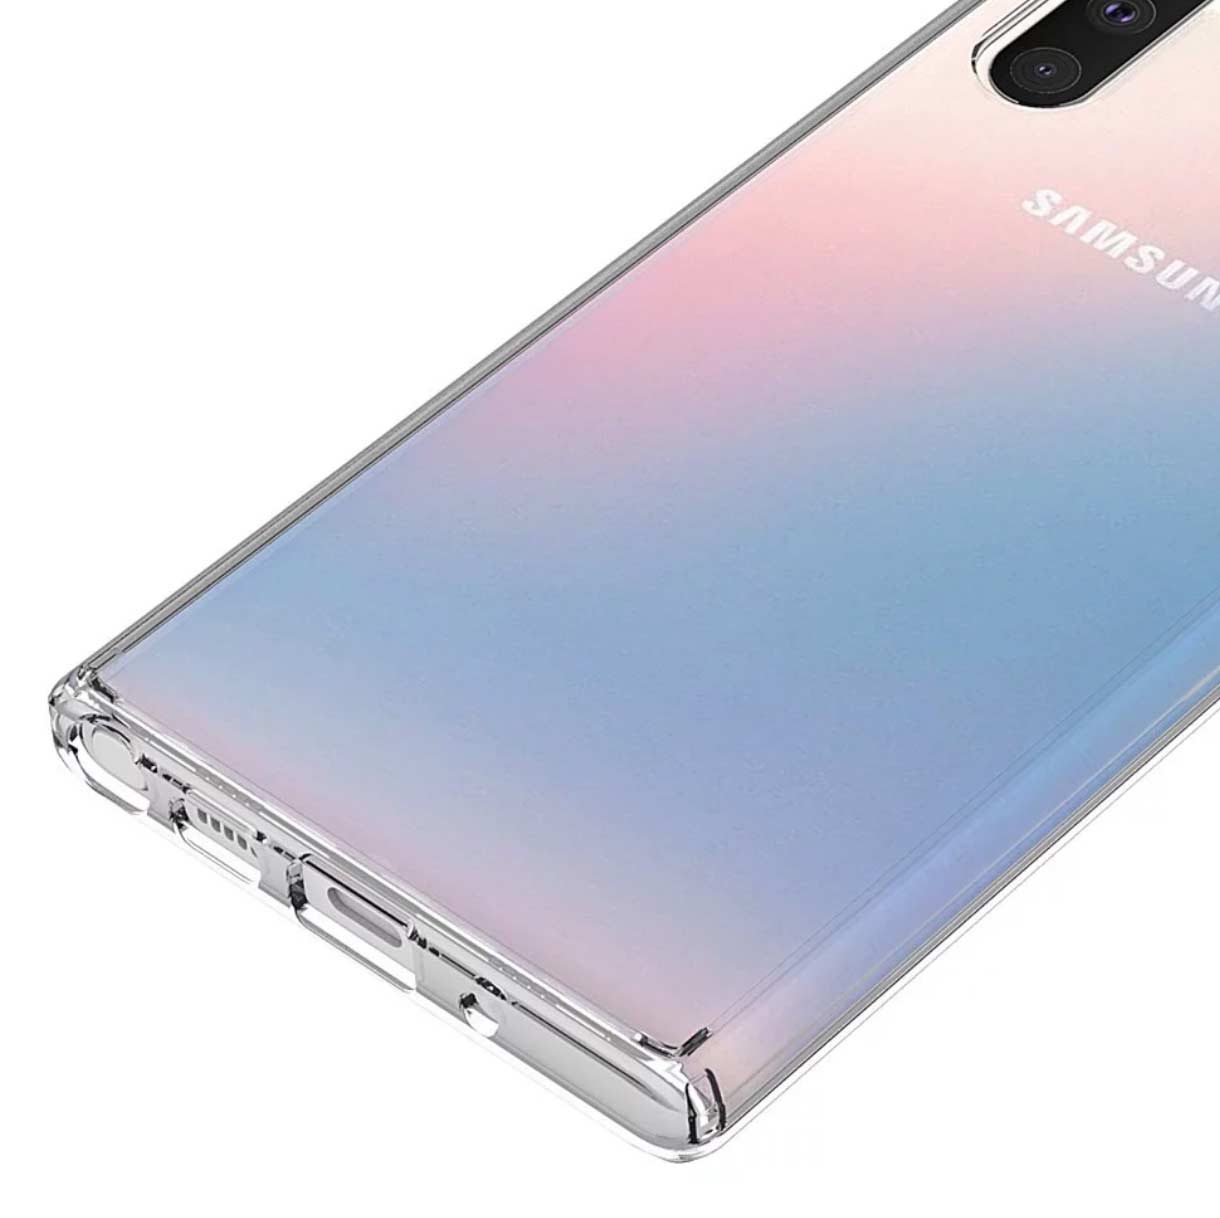 Galaxy Note 10 Renders Make You Forget About The Hole Slashgear